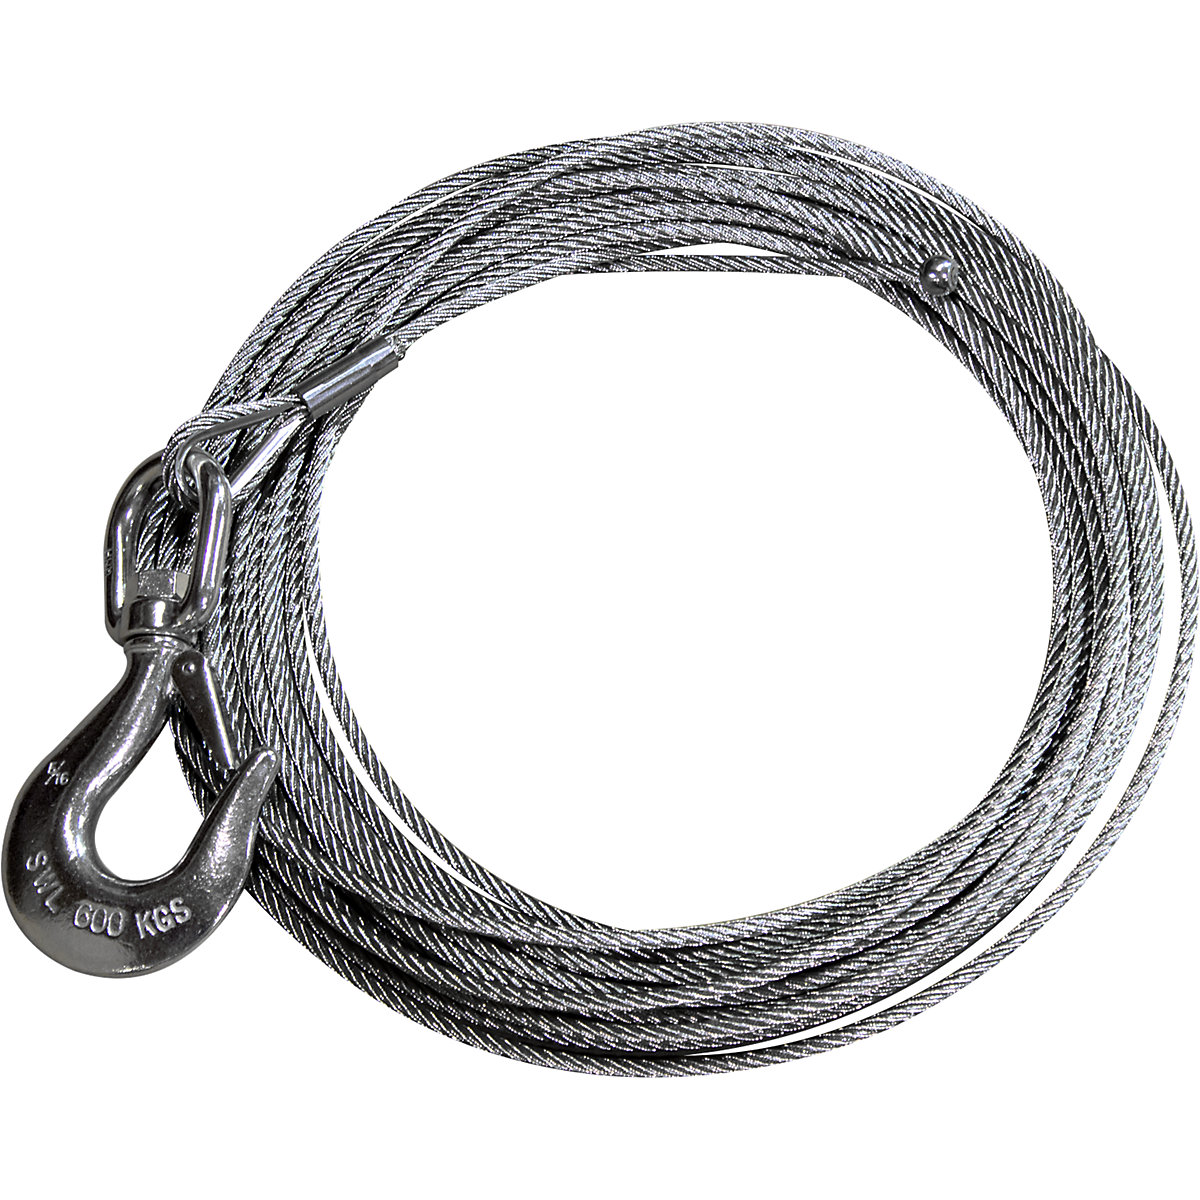 Stainless steel rope incl. load hooks - Thern